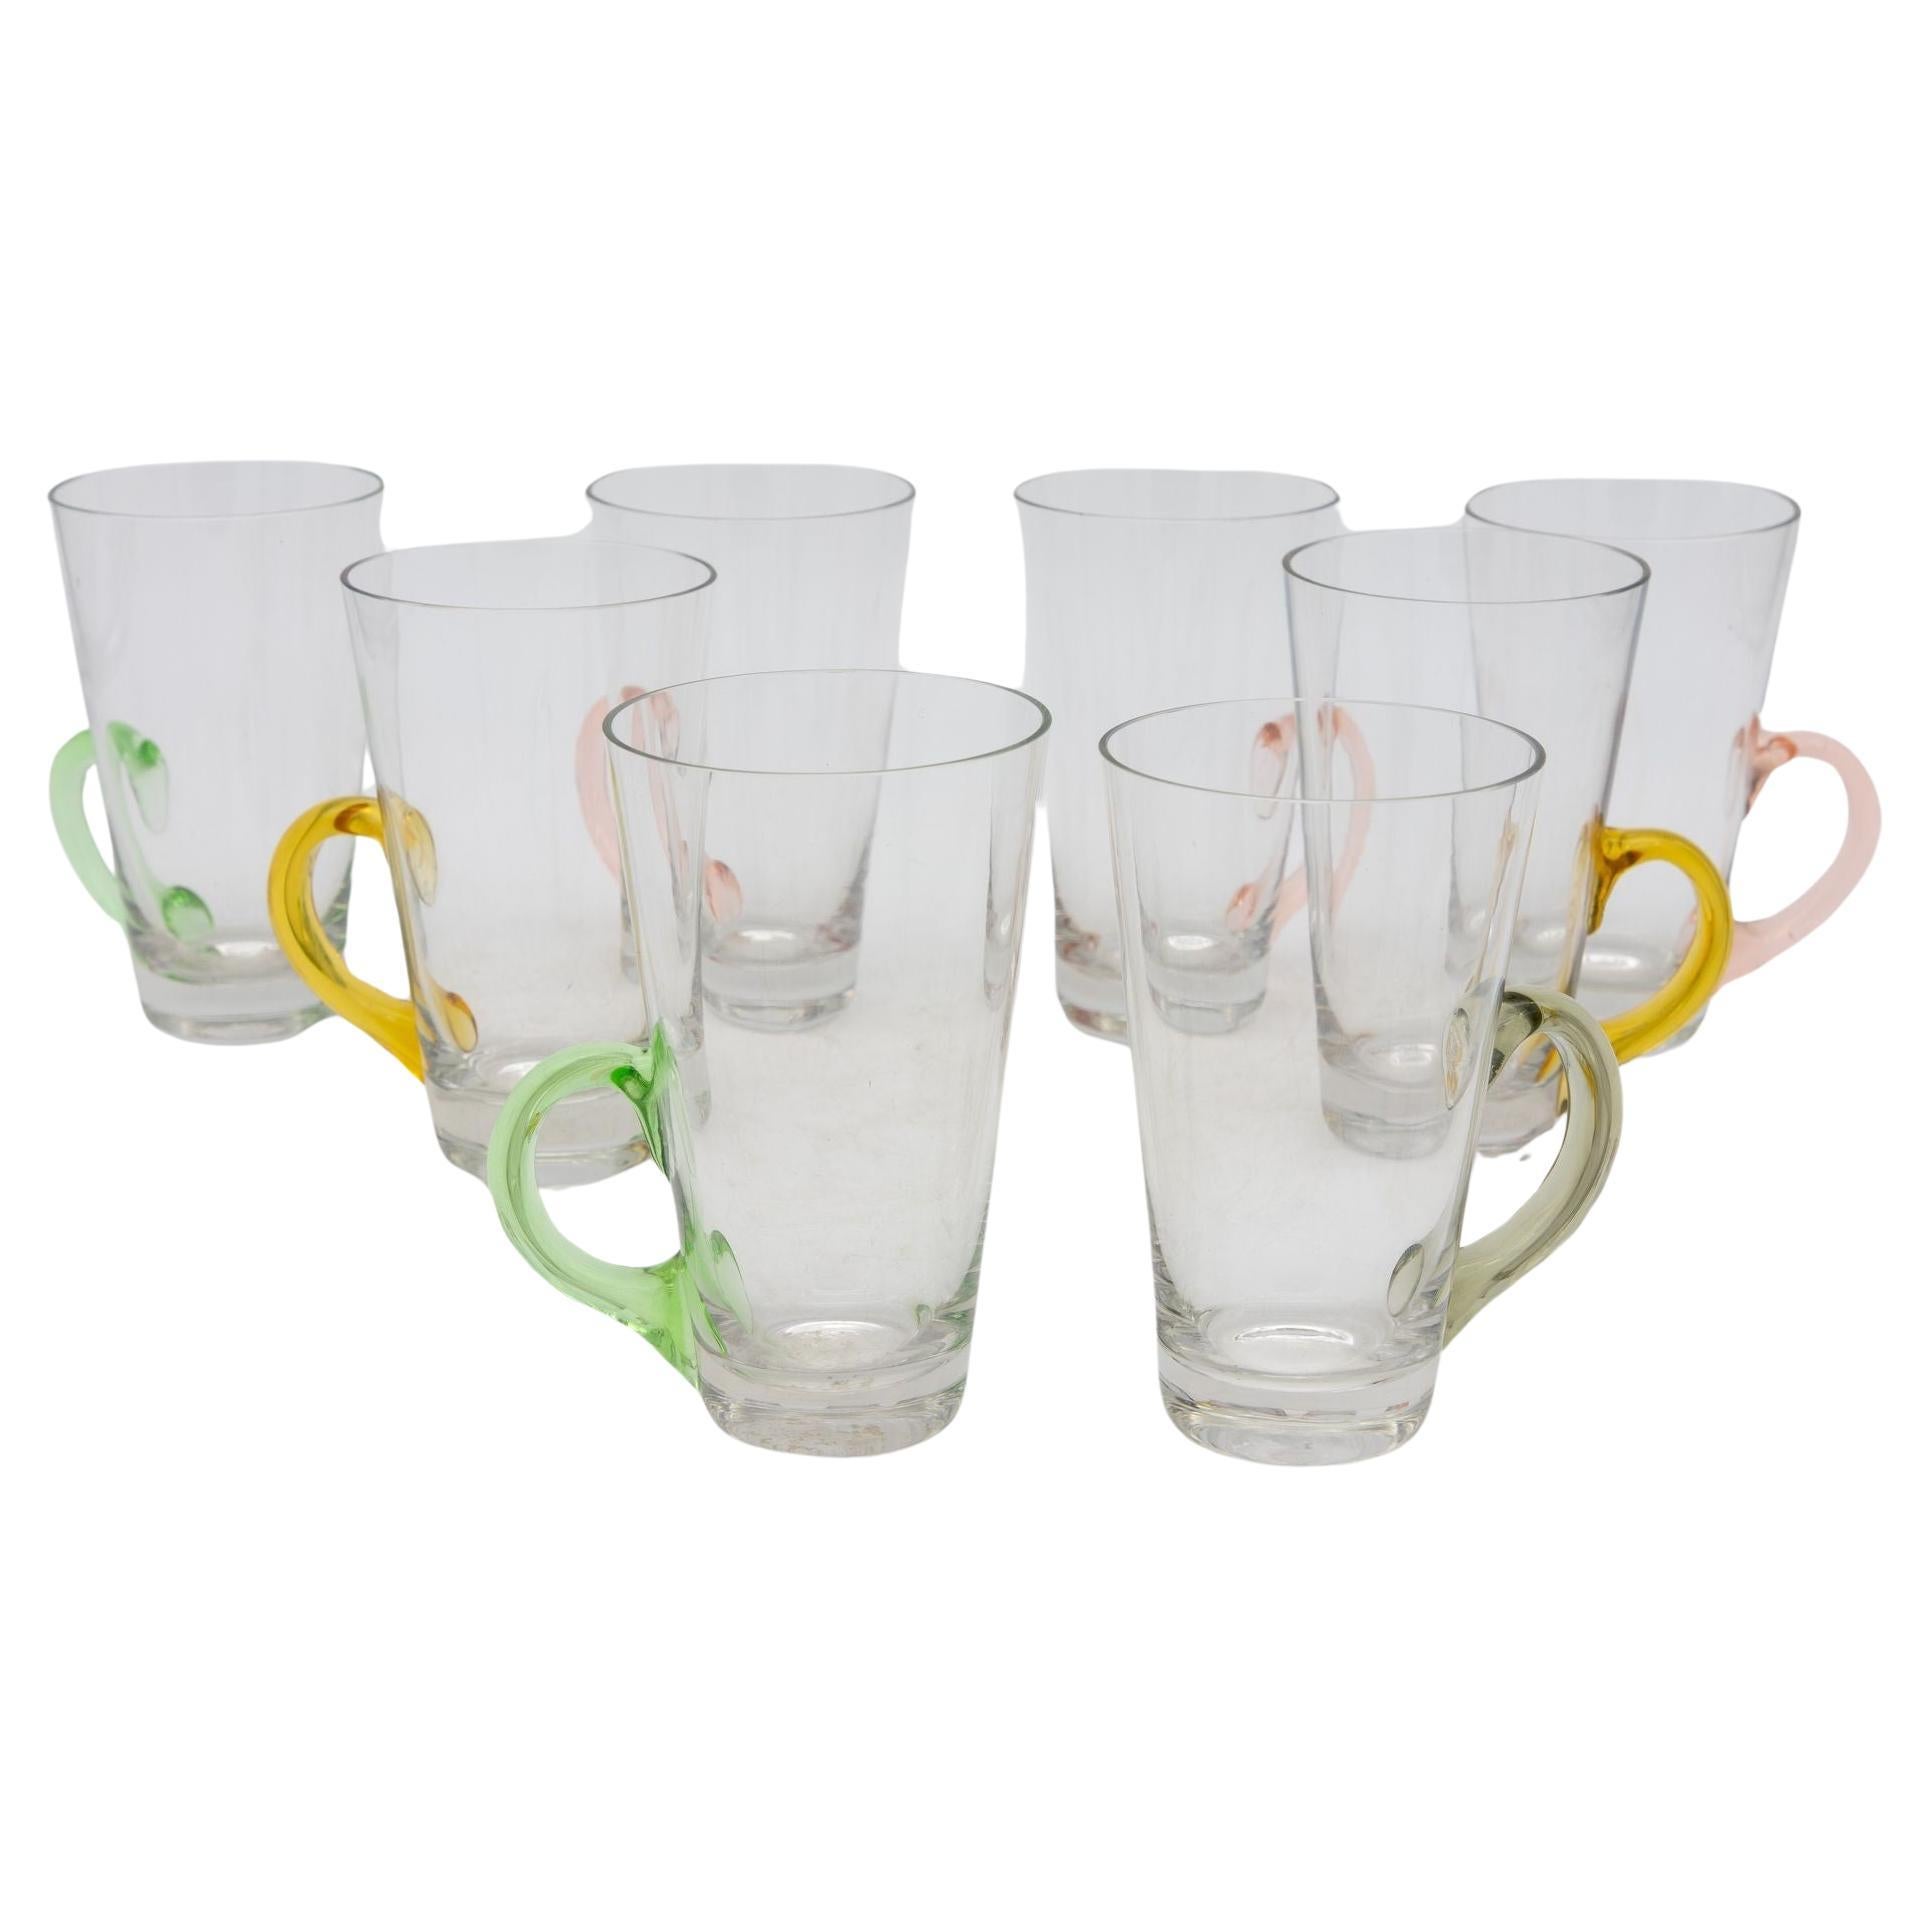 Set of Eight Vintage Hot Toddy Glasses with Colorful Handles